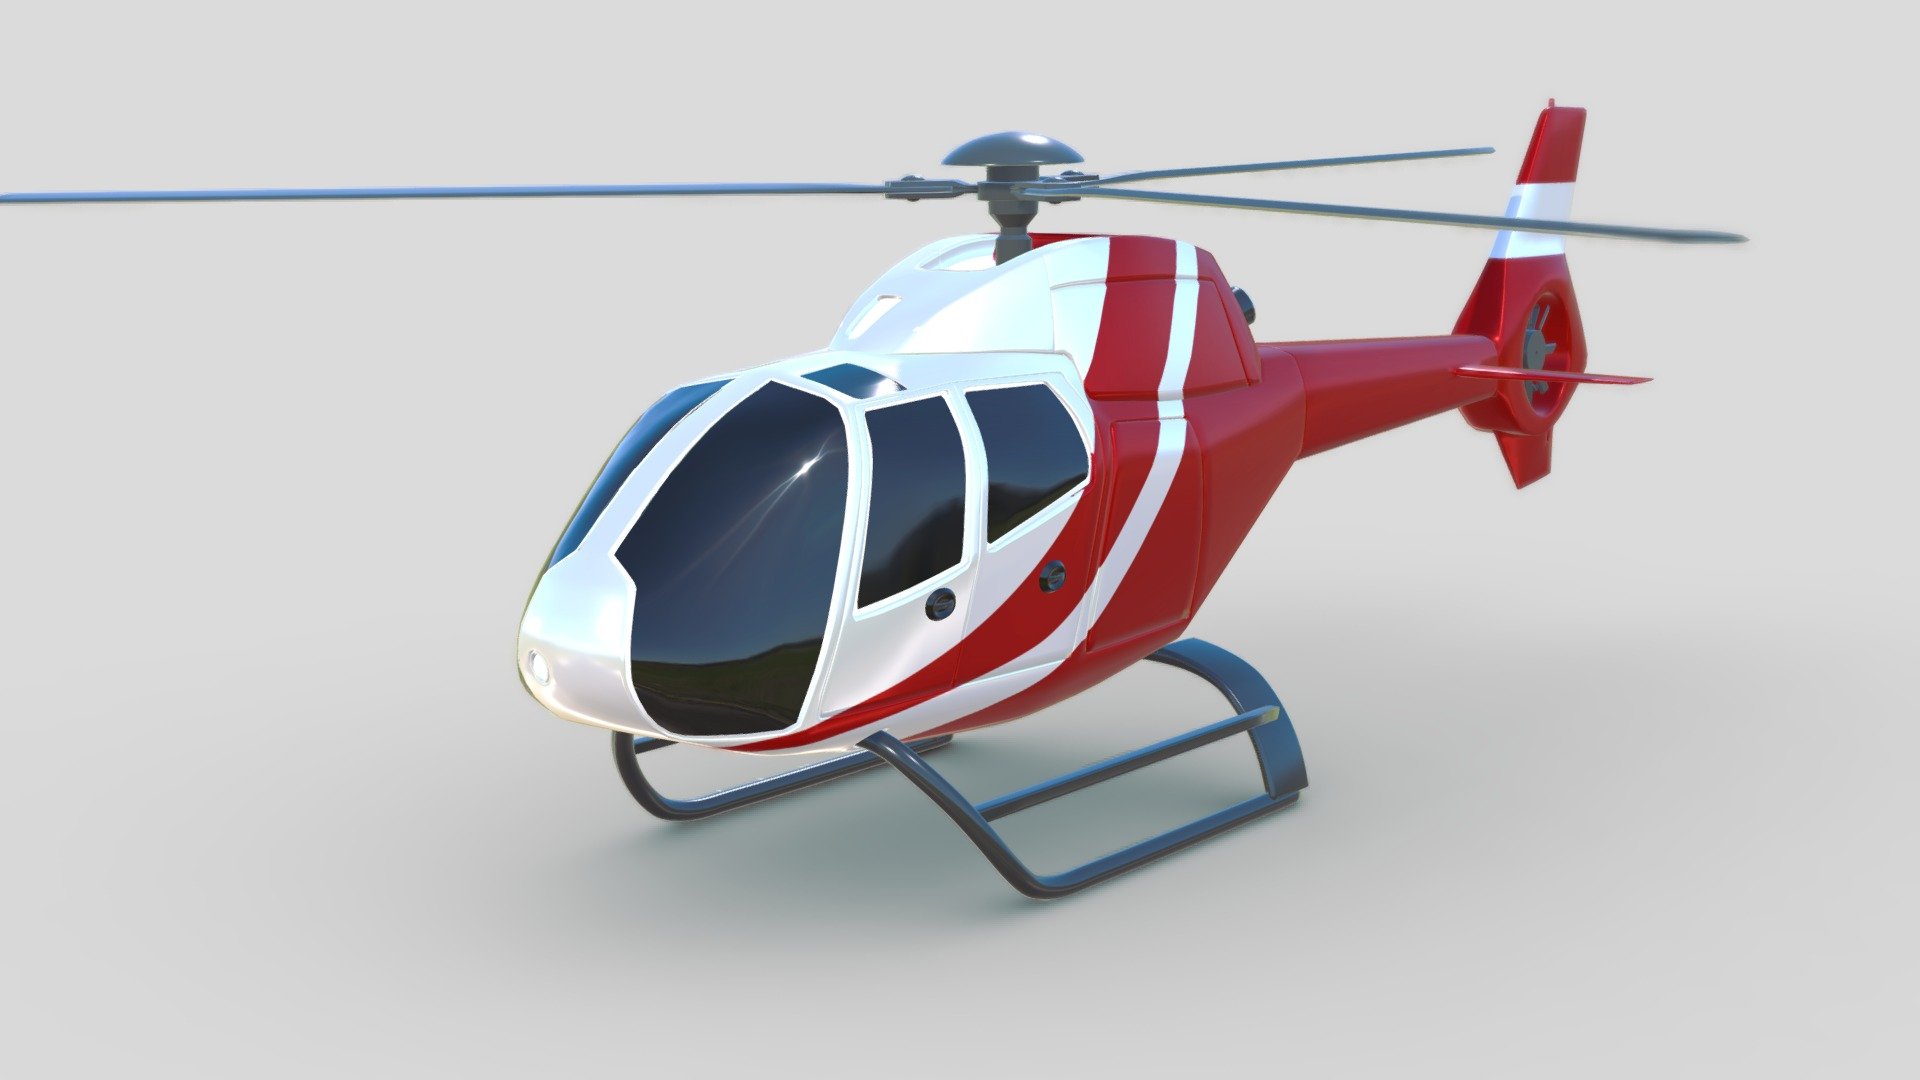 Not vey accurate,but pretty detailed exterior 3d model of Eurocopter Colibri EC-120B civil helicopter.Model created with blender3d 2.76 version.Renderings in my image previews were created with blender internal render.Objects named by object and by material.There are no interior objects for this product.3d model consists of main fuselage,sledges parts and by rotor blade parts.Also there are stabilizator parts at the tail of the helicopter.There is one texture for fuselage with red stripe details as decoration part.Texture for the fuselage is png 2050x2050px.Doors and handles are jointed,and you can't open it.Enjoy my product,I hope so it will be useful for yours projects.

3ds file 
verts: 232914 
polys: 77638

obj file 
verts: 45317 
polys: 77638

Checked with GLC player - Eurocopter Colibri EC-120B civil helicopter - Buy Royalty Free 3D model by koleos3d 3d model